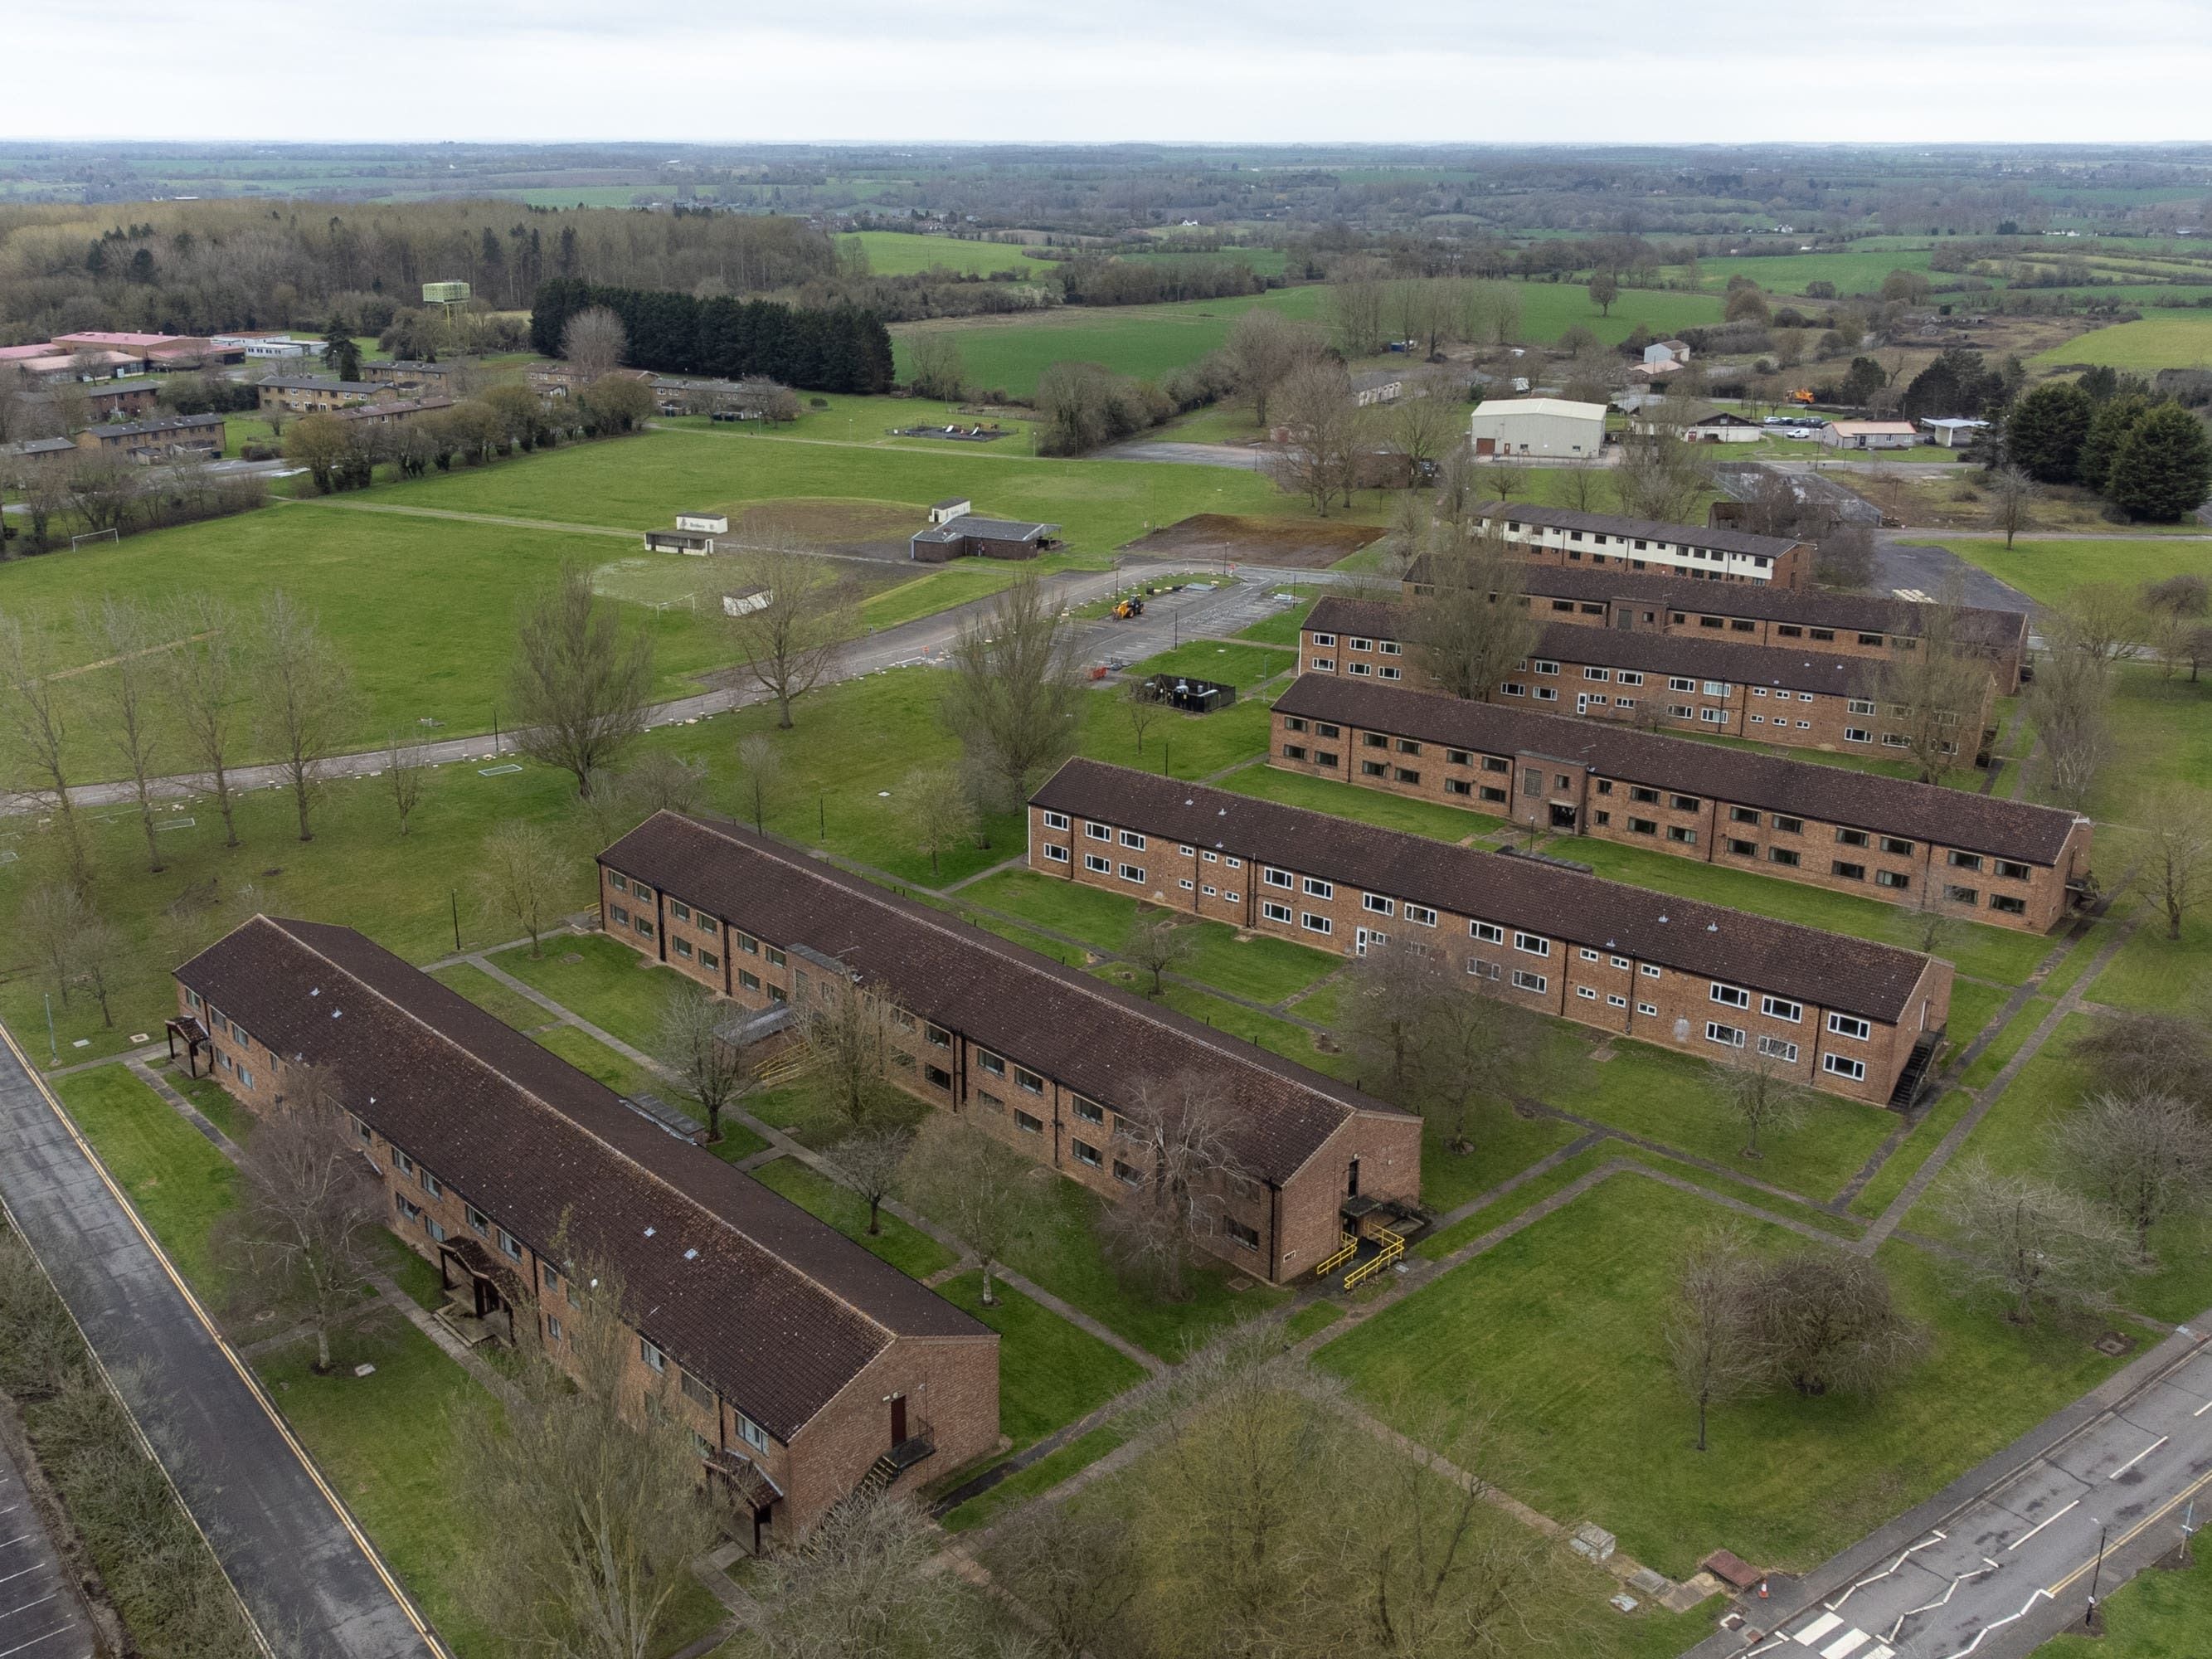 Asylum seekers wrongly housed at ‘prison-like’ former RAF base, High Court told